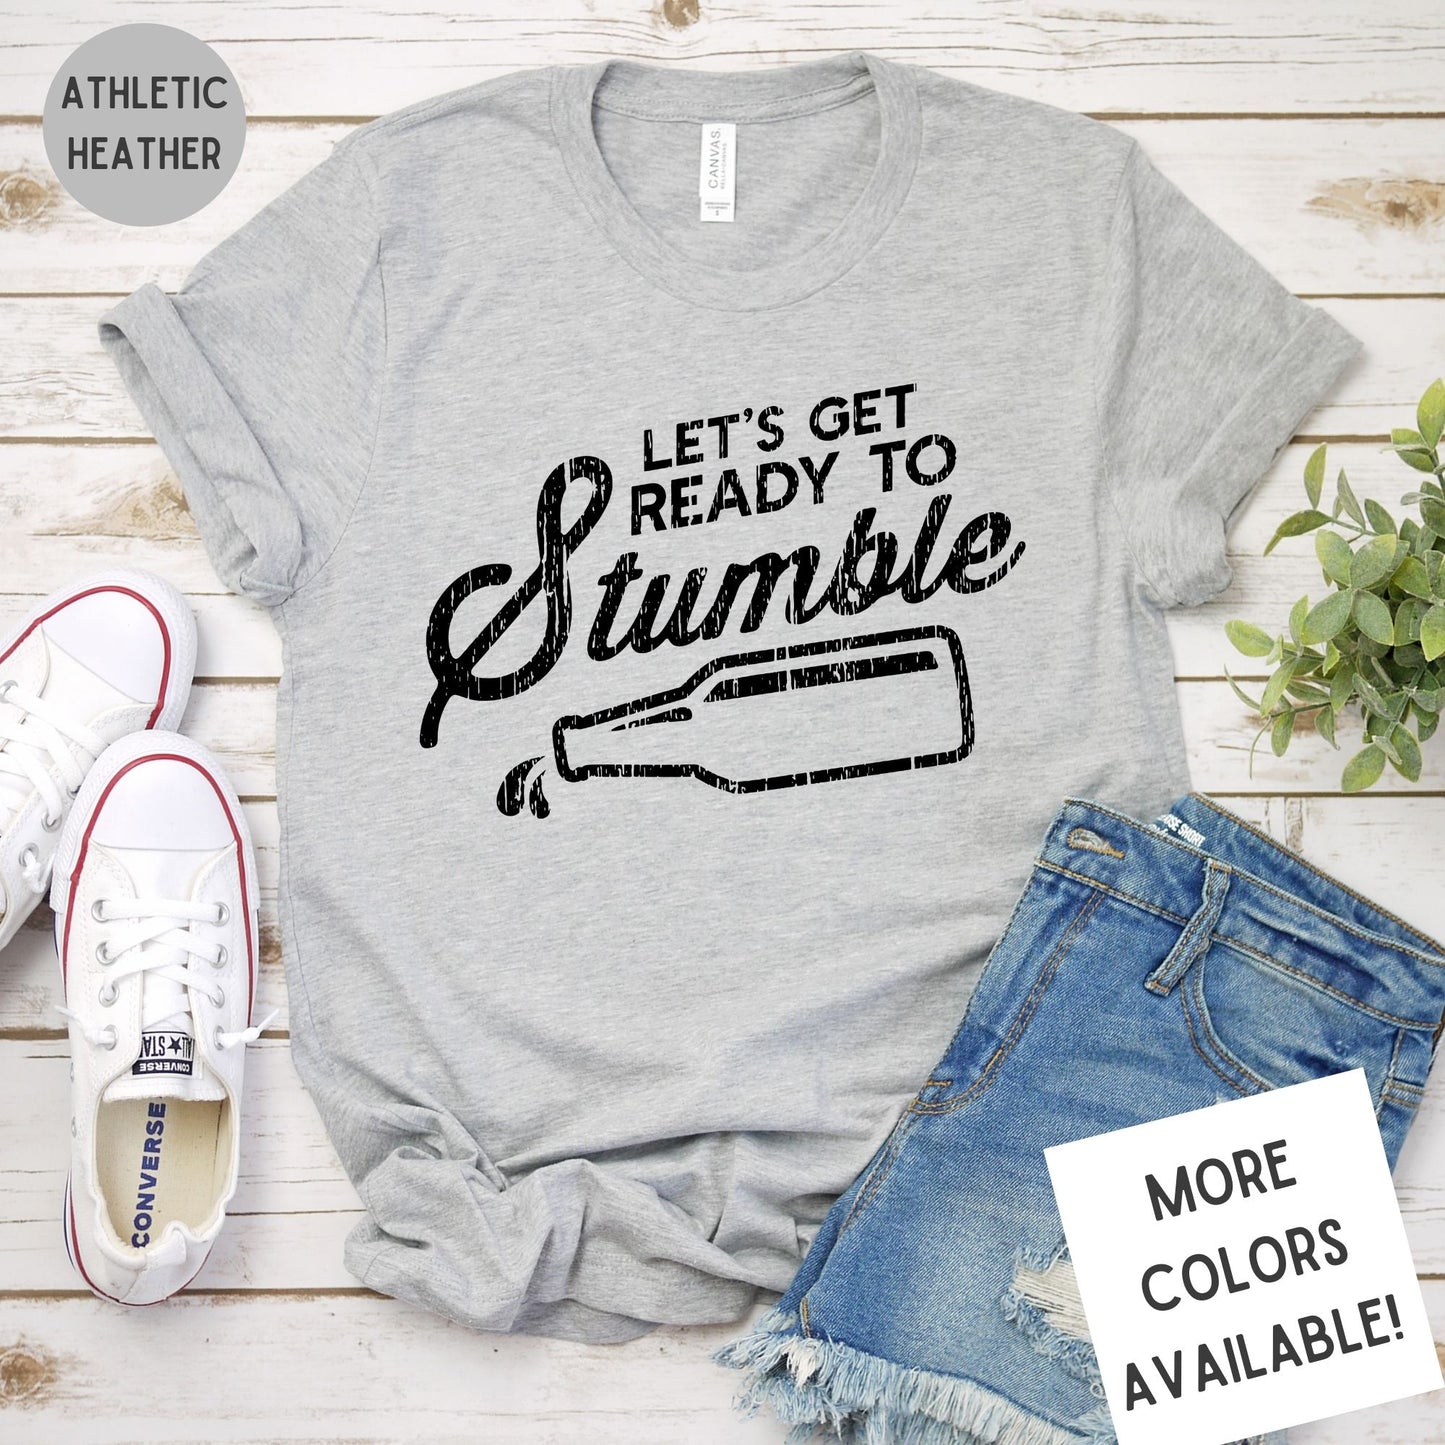 Let's Get Ready To Stumble Graphic T-Shirt | Funny Drinking Shirt | NFL Drinking Shirt